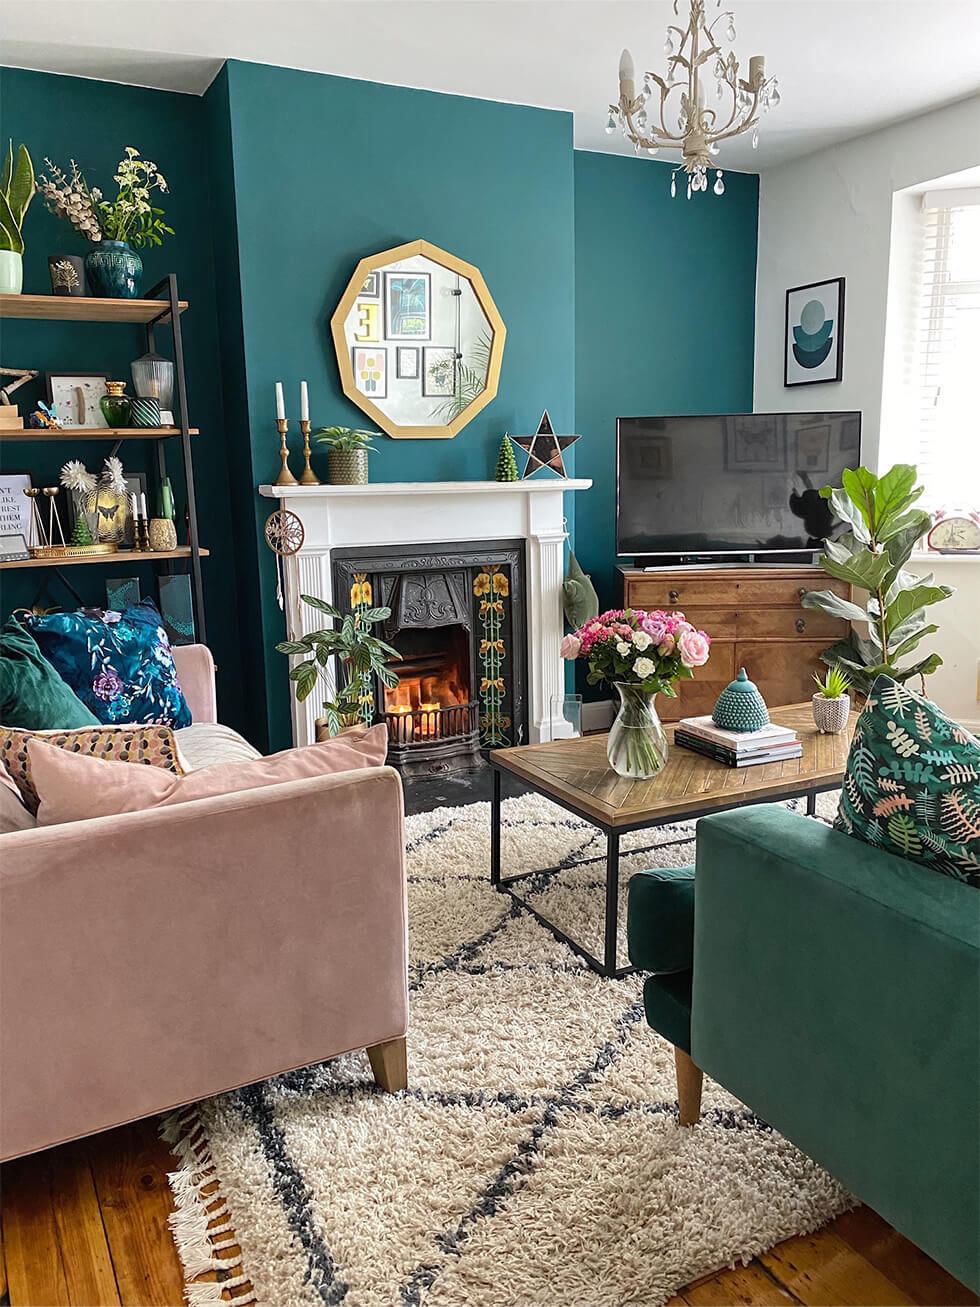 Modern boho living room with bold retro accents